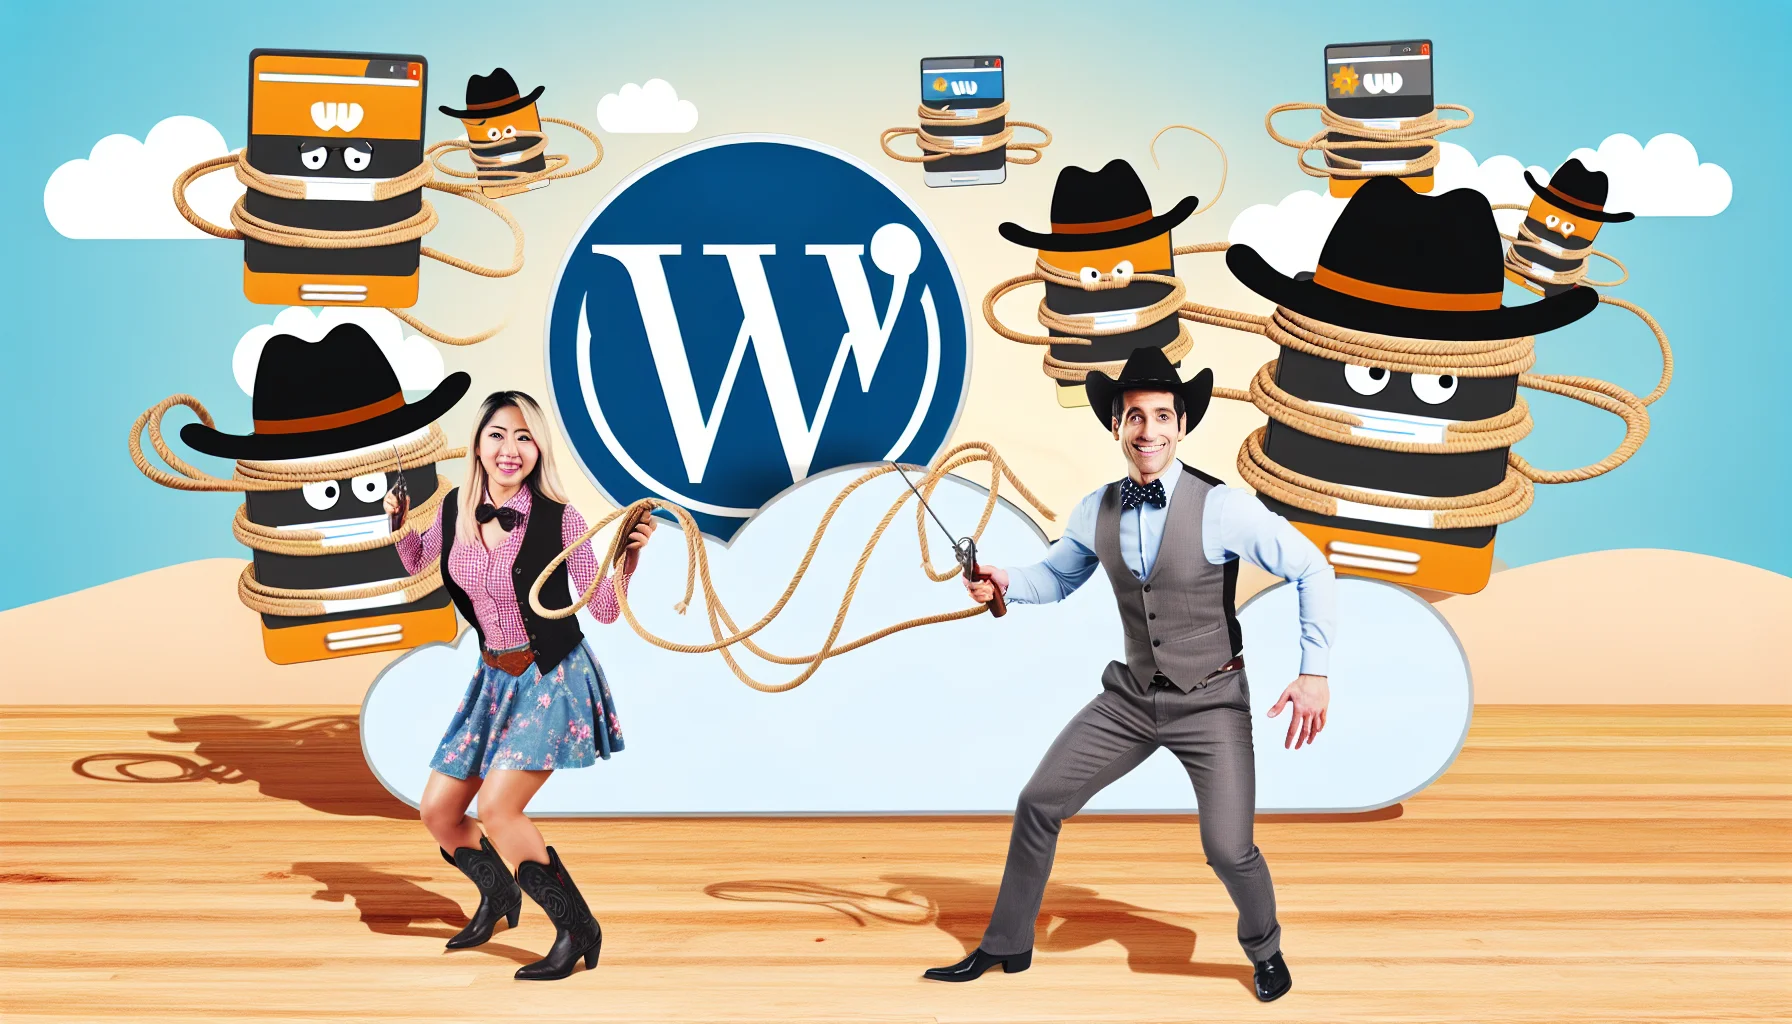 Create a comical scene portraying a web hosting service. In this scenario, one middle-aged Caucasian man and one young South Asian woman, both dressed in smart casual attire, are trying to host multiple floating digital websites in the cloud with lassos, as if they were cowboys in the Wild West. The websites have the WordPress logo but with playful faces, creating a humorous depiction of web hosting. Include a bright background, upbeat color scheme and add funny tech-themed rodeo elements around.